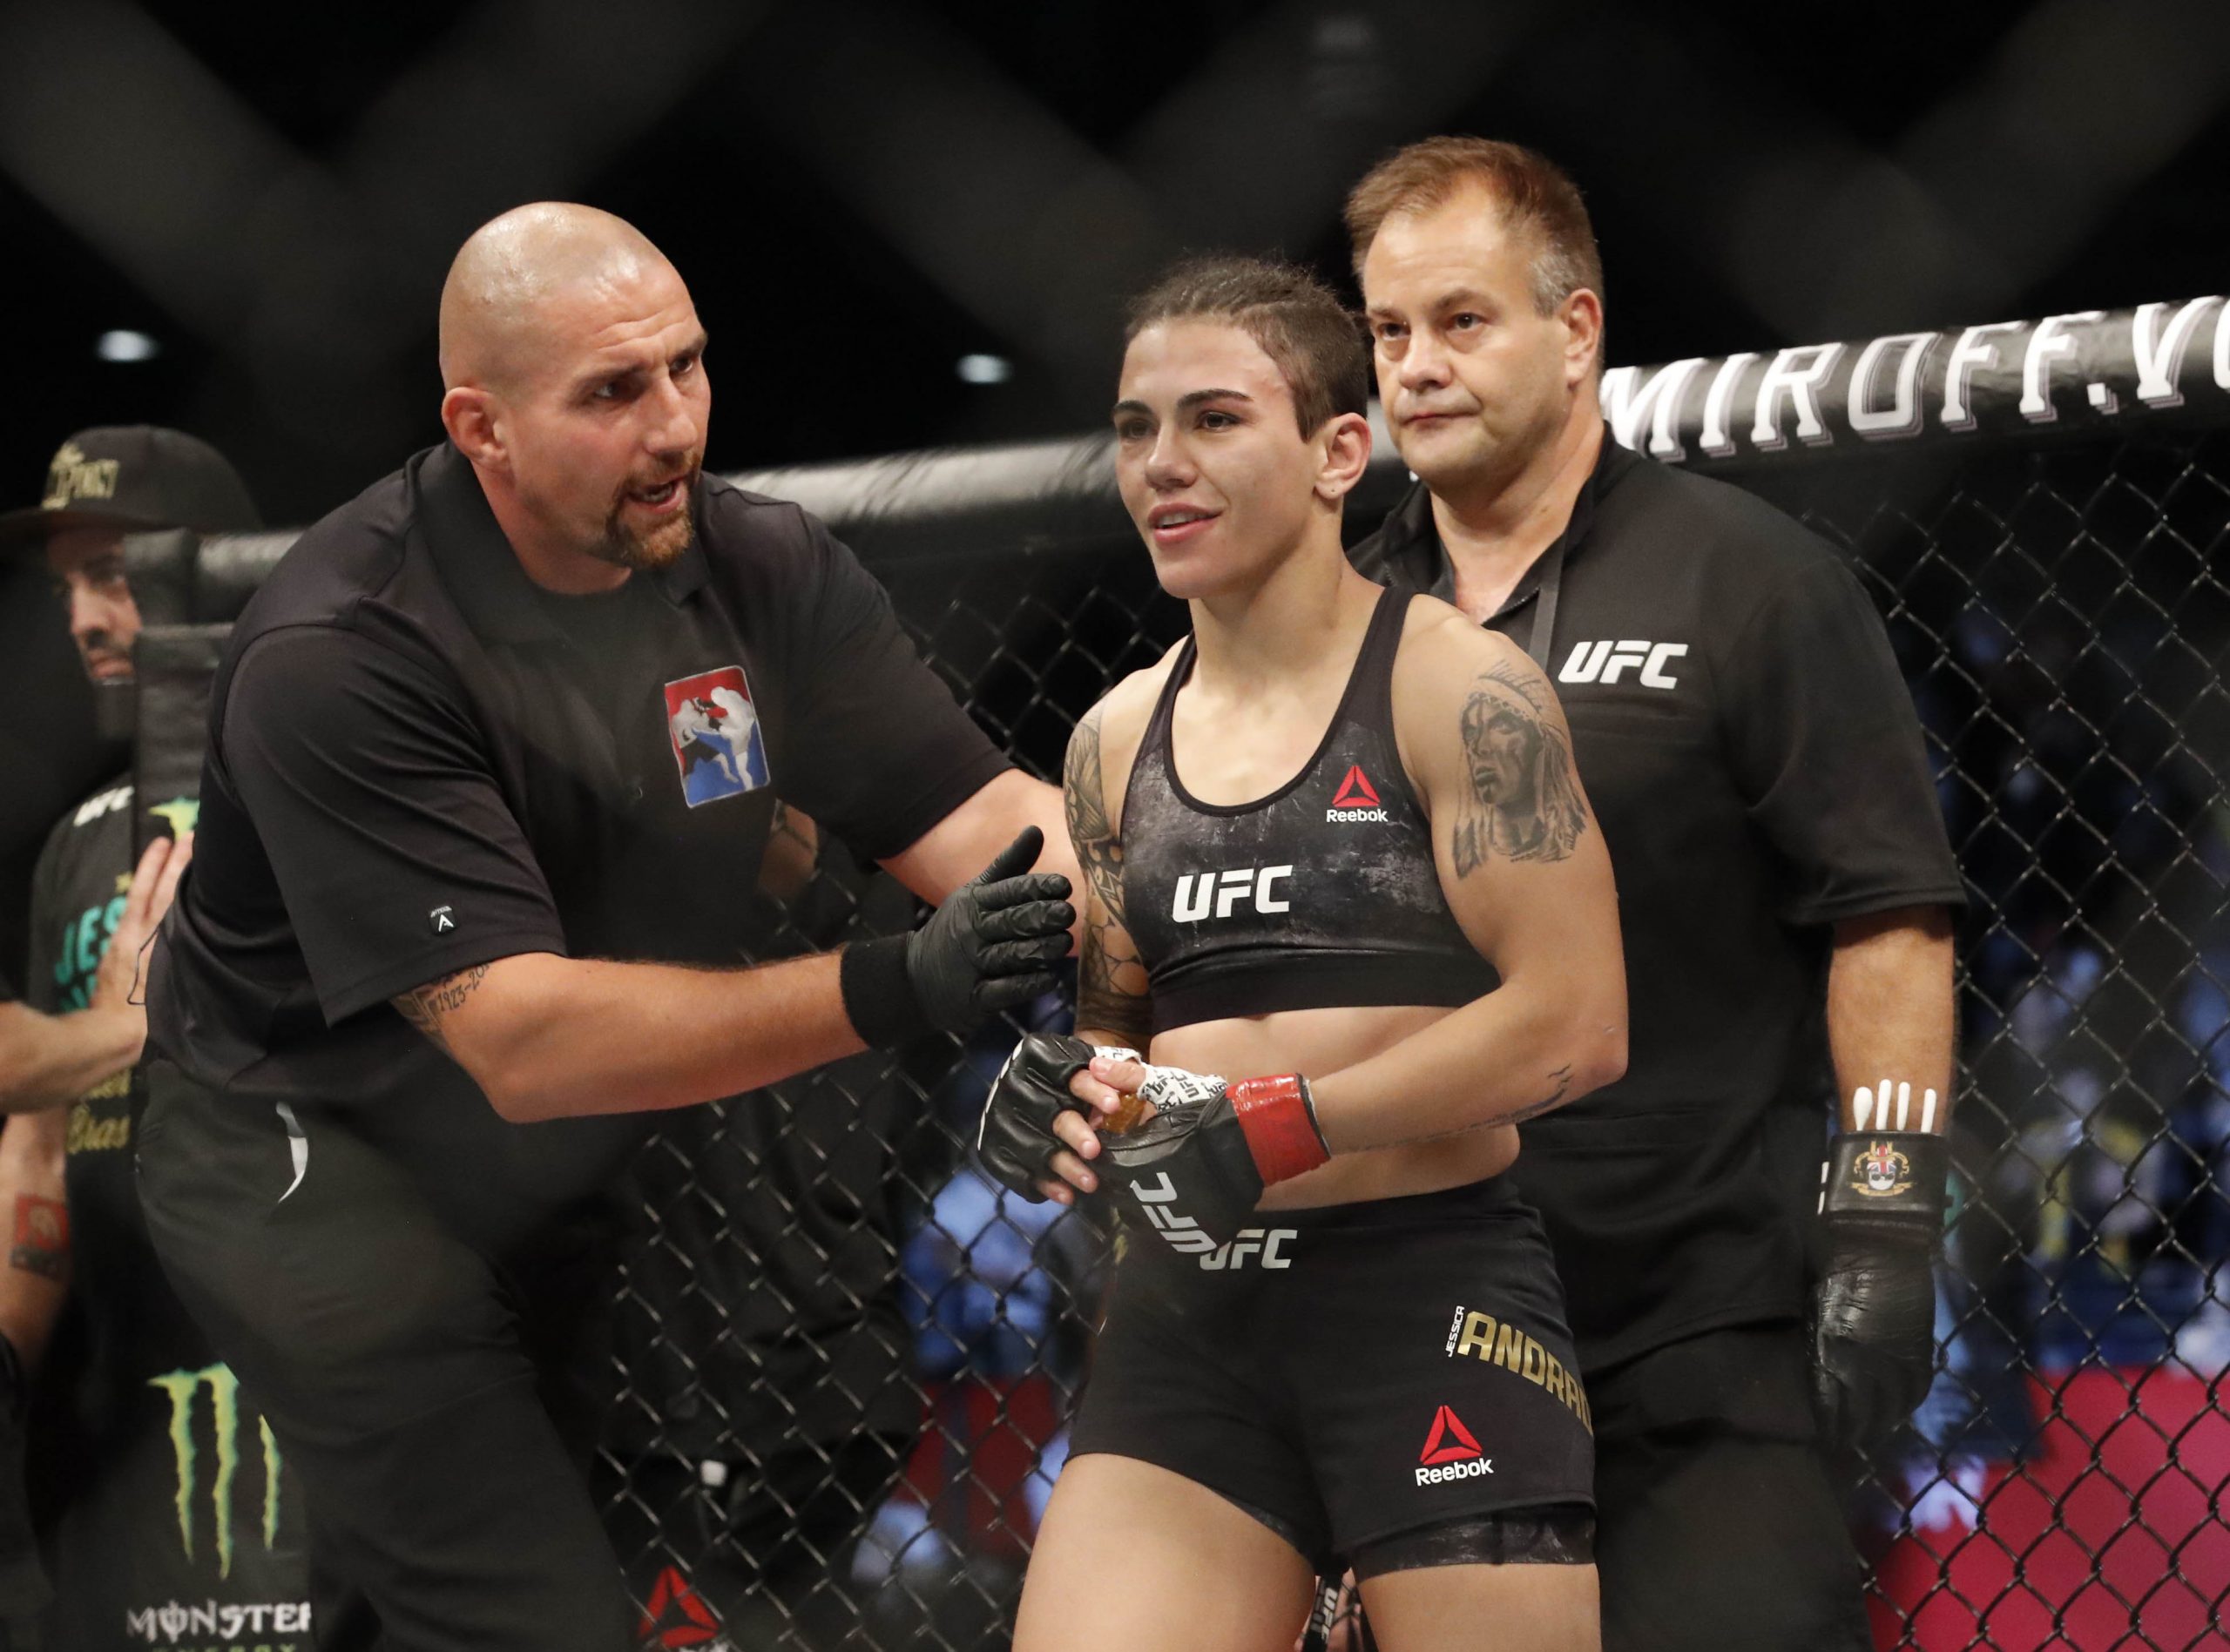 Aug 31, 2019; Shenzhen, China; Jessica Andrade (red gloves) after losing to Zhang Weili (blue gloves) during UFC Fight Night at Shenzhen Universiade Sports Centre.